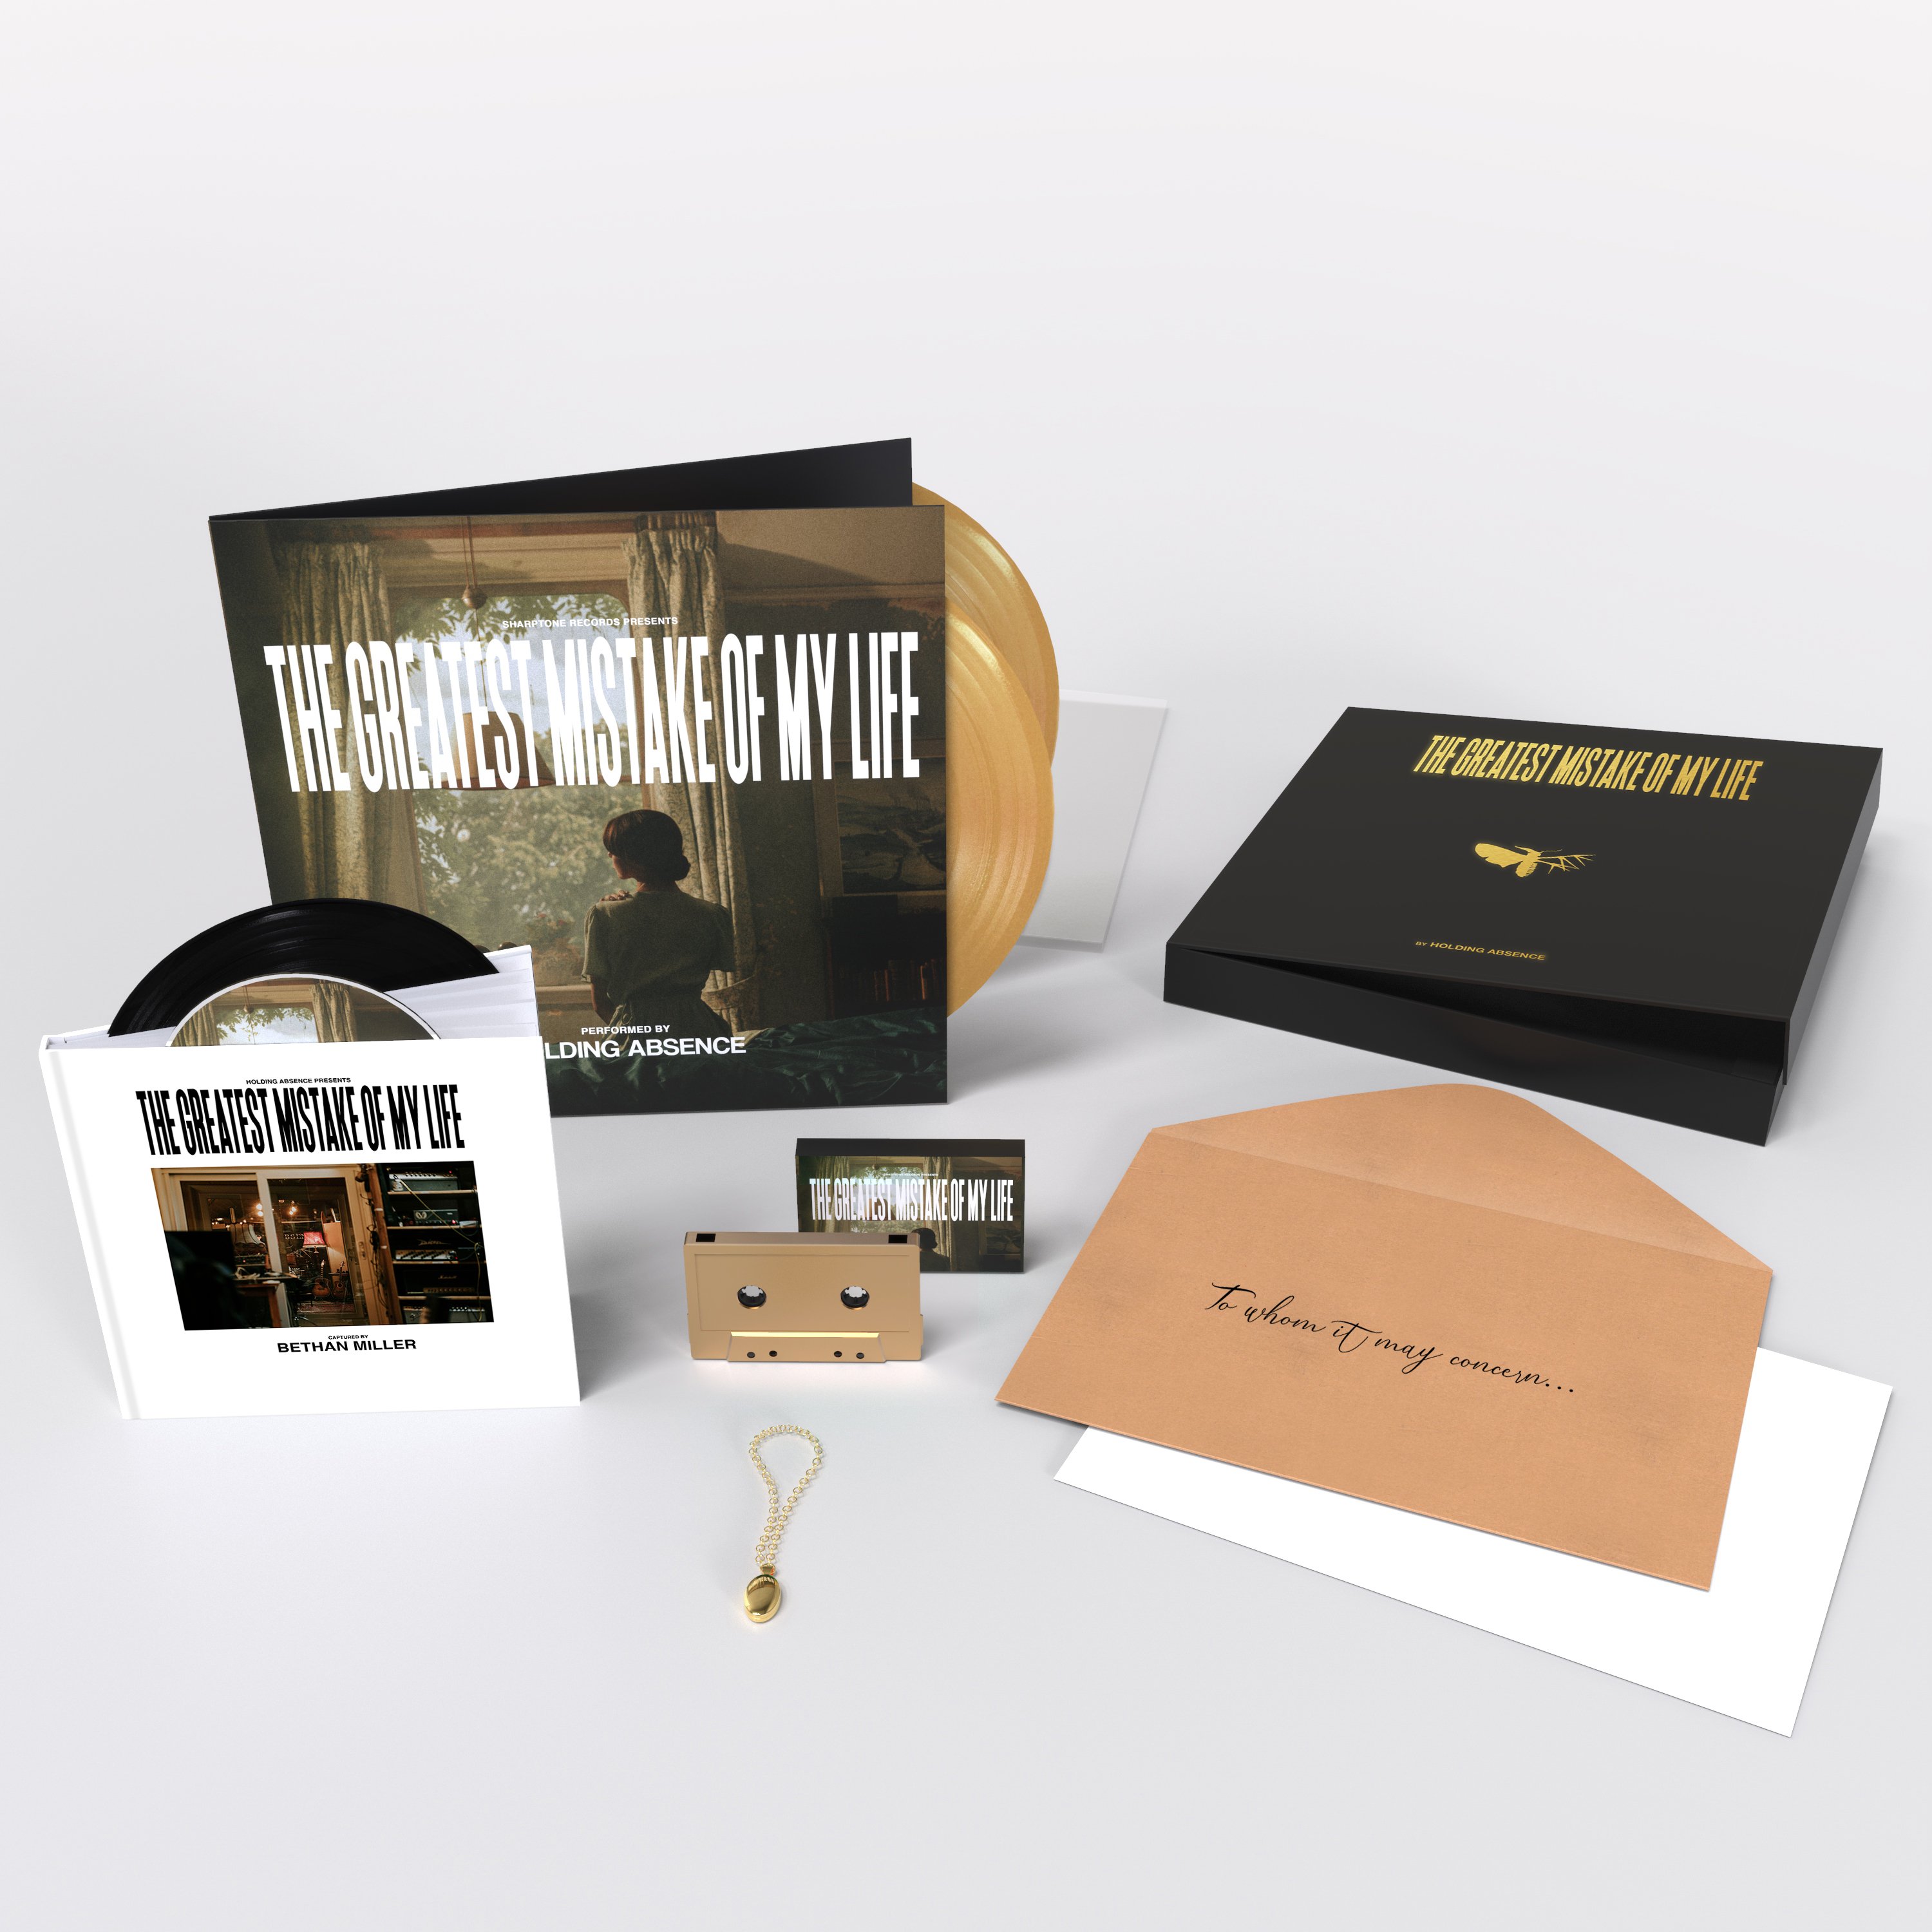 Holding Absence - 'The Greatest Mistake Of My Life' Limited Edition Box Set Pre-Order